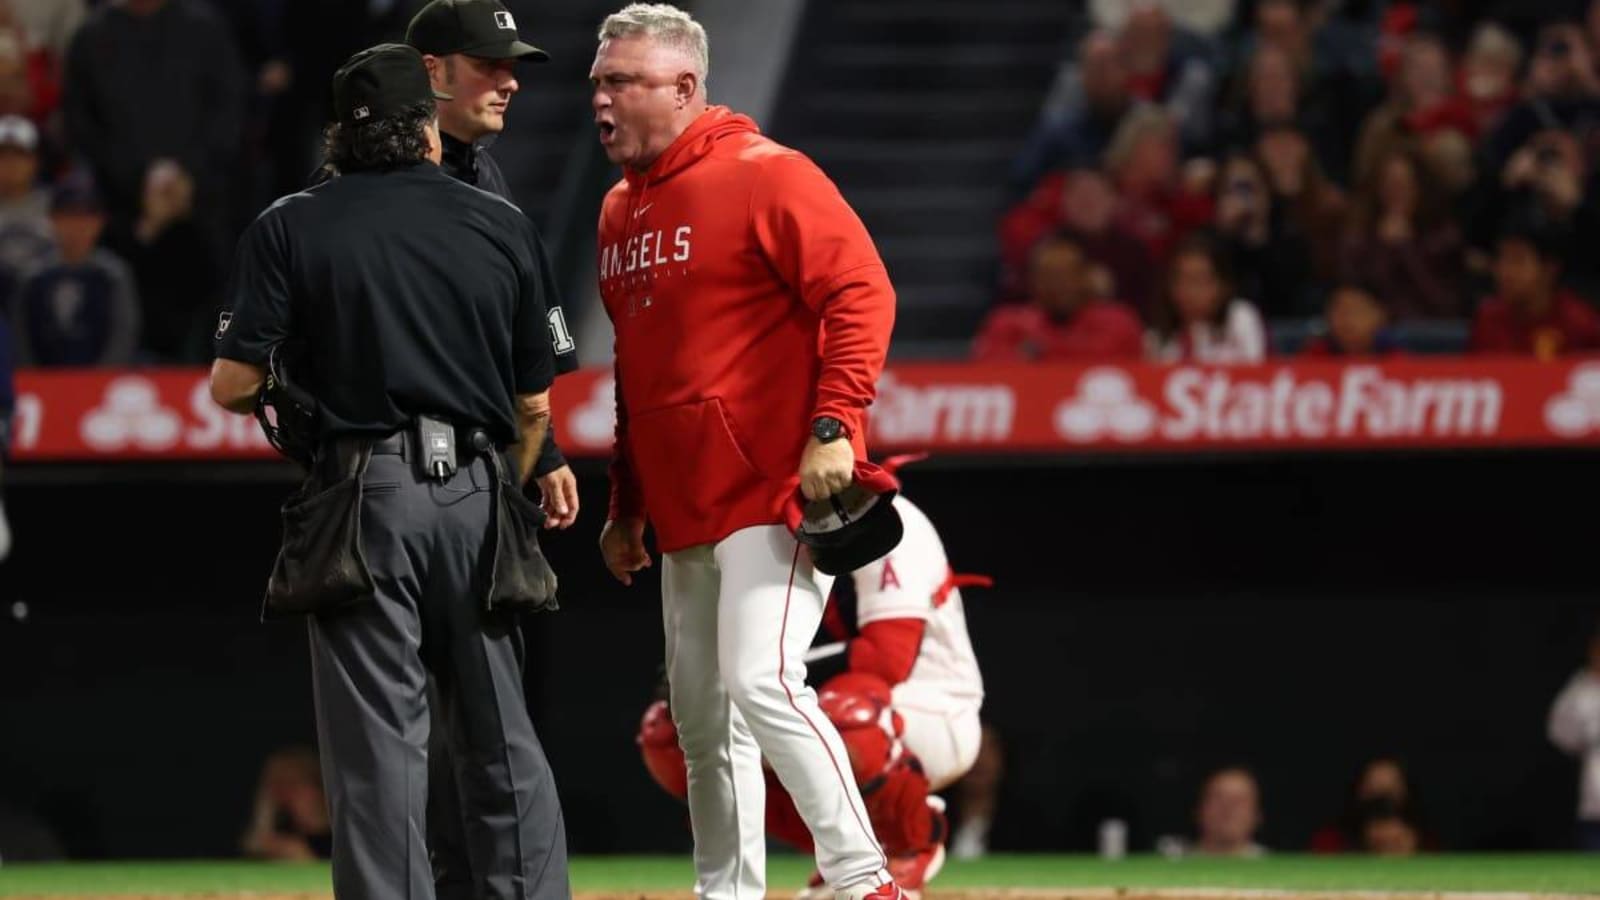  MLB Pundits Agree Manager Phil Nevin’s Job ‘In Jeopardy’